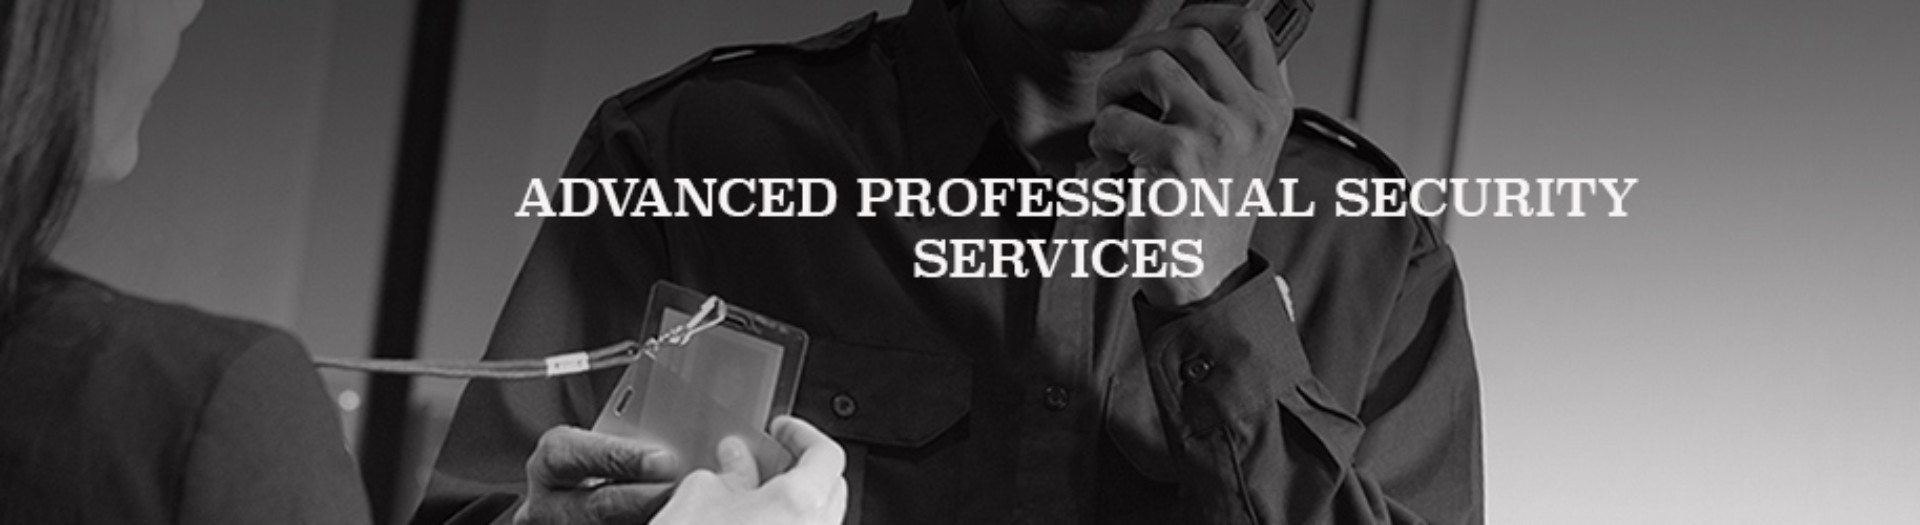 Security Officers & Security Services You Can Trust